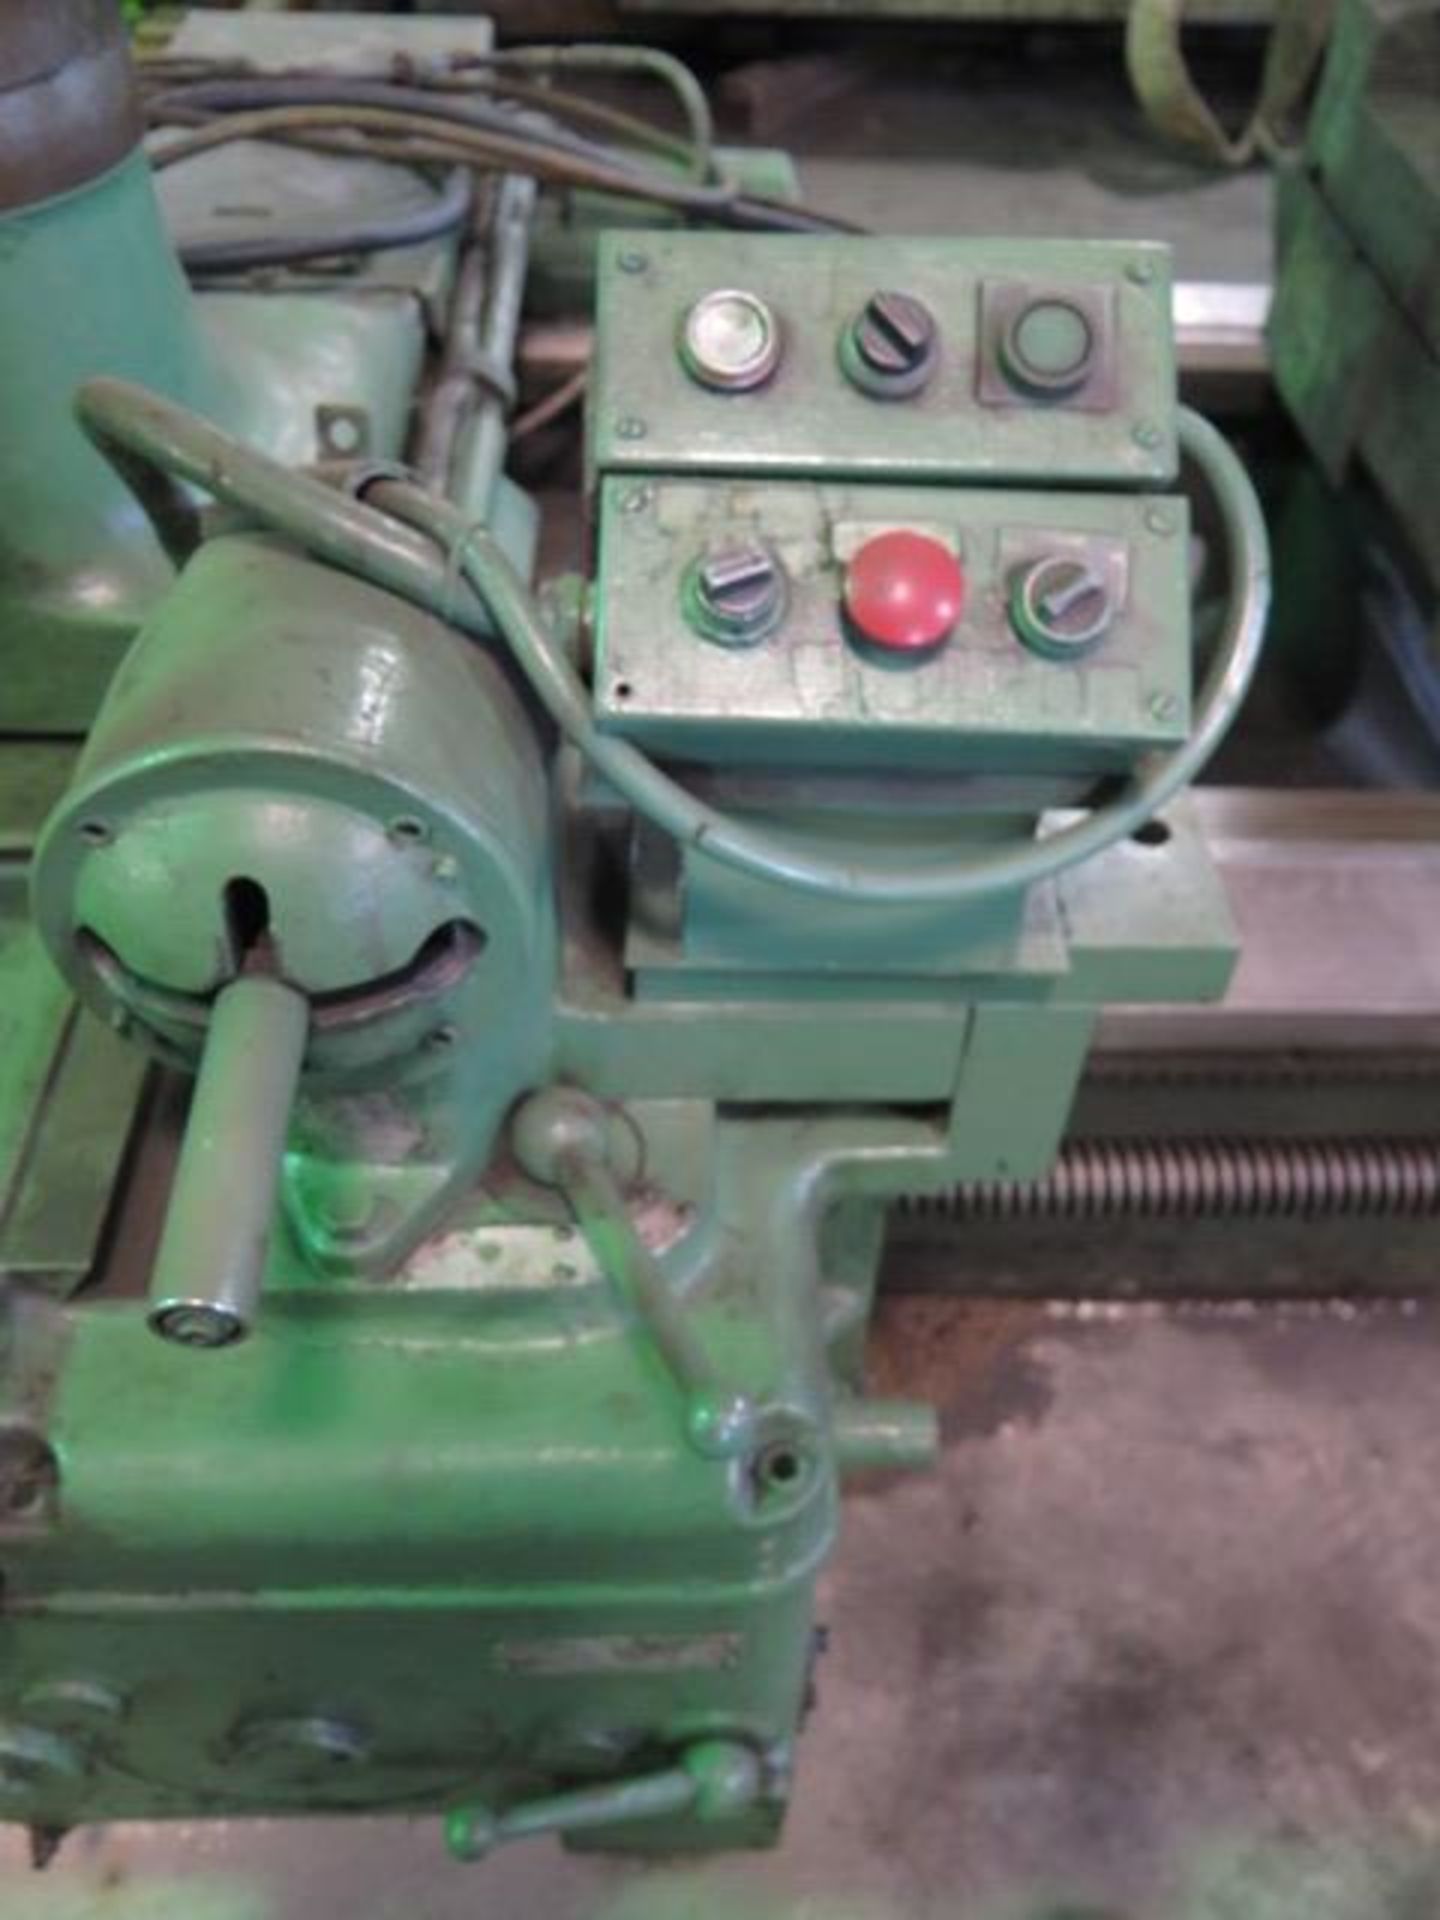 Niles A54P 62” x 140” Lathe s/n 23579 w/ 3.94-232 RPM, Inch Threading, Steady Rest, SOLD AS IS - Image 14 of 20